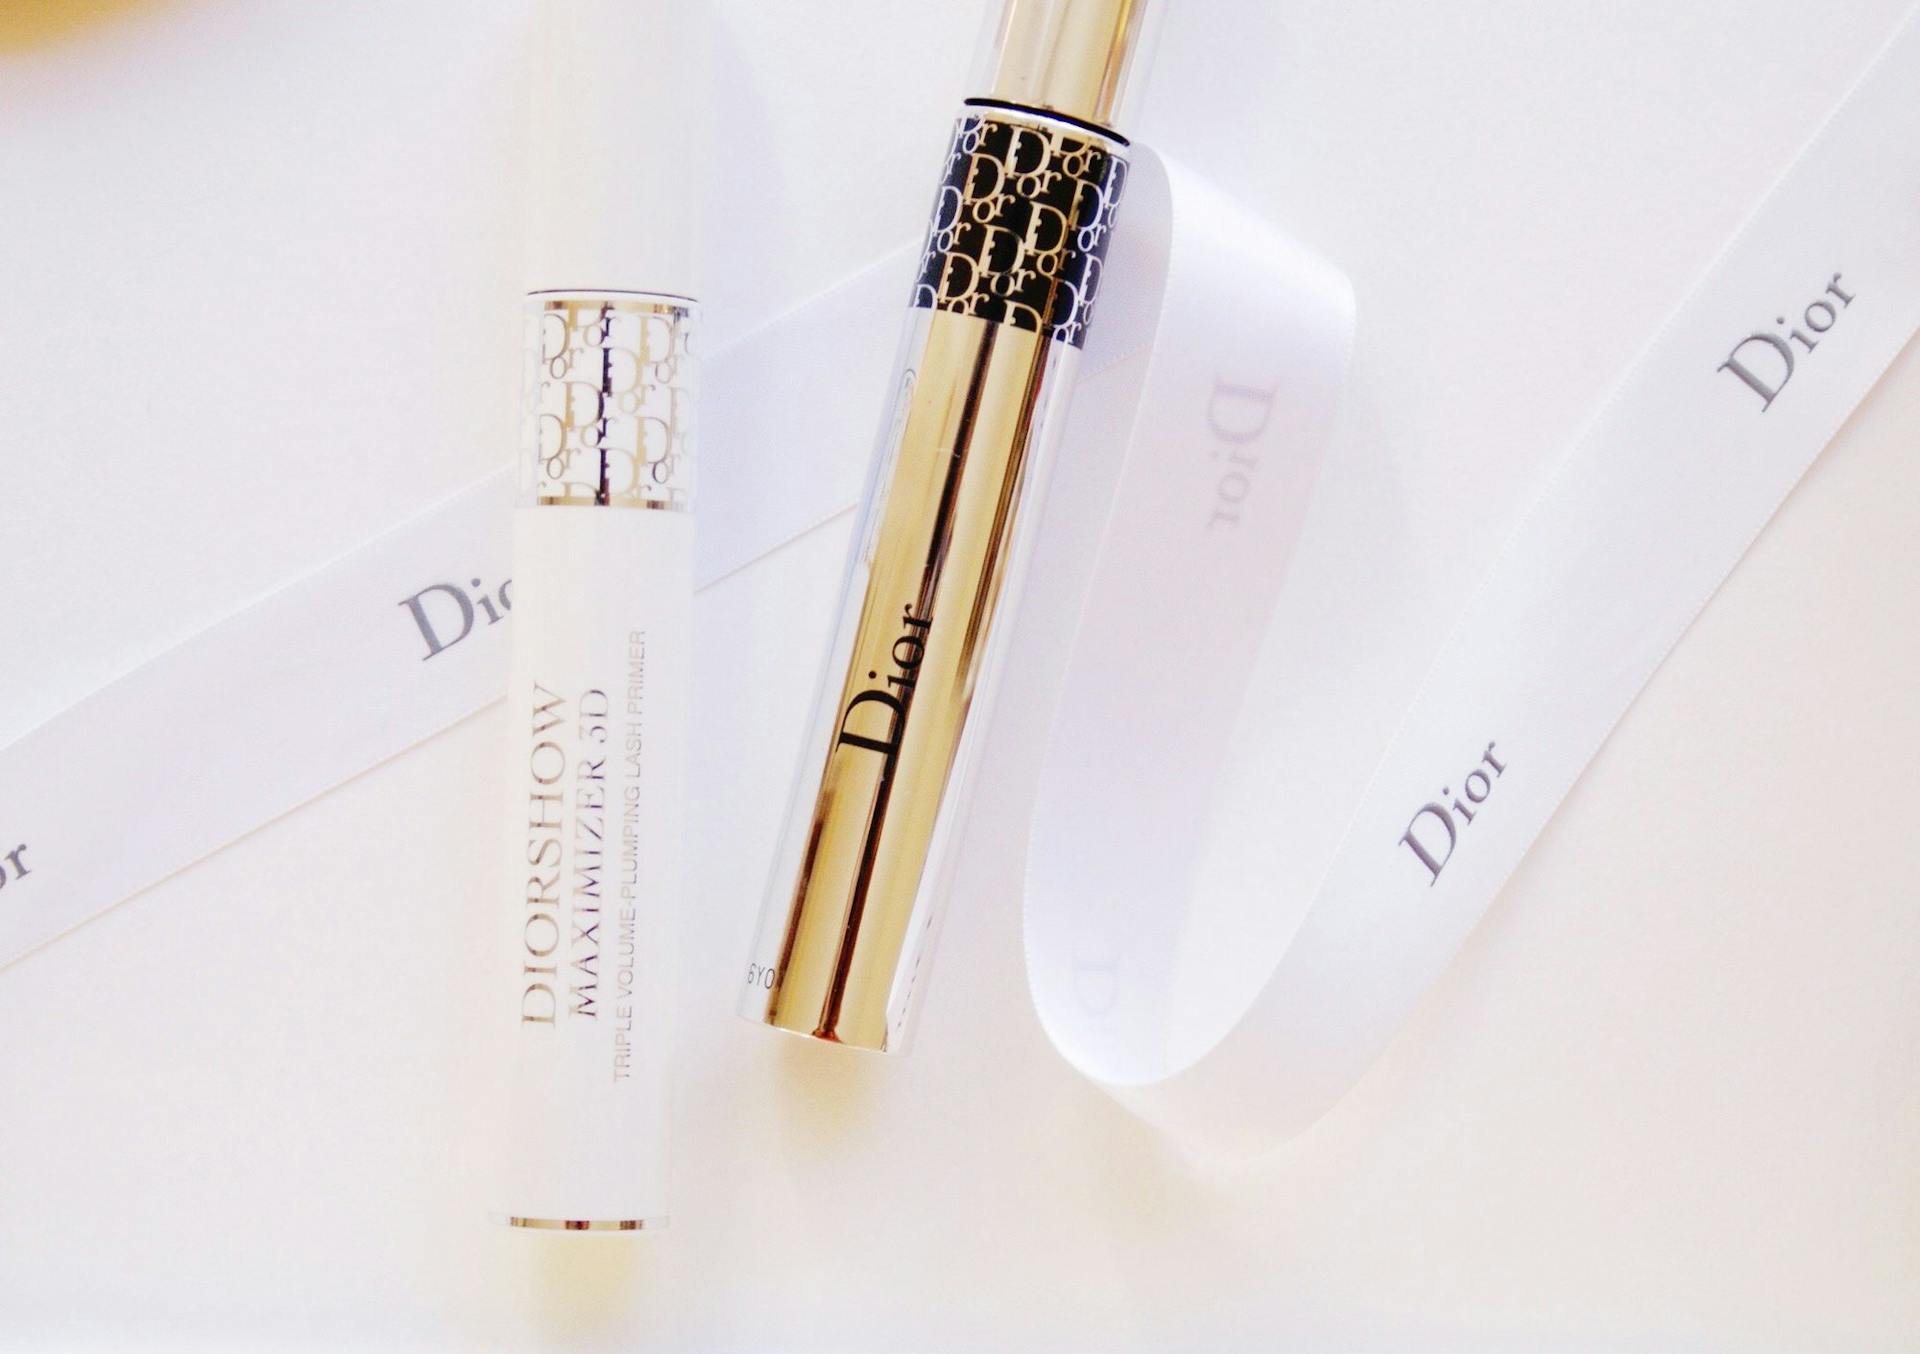 The Dior Mascara Review with primer